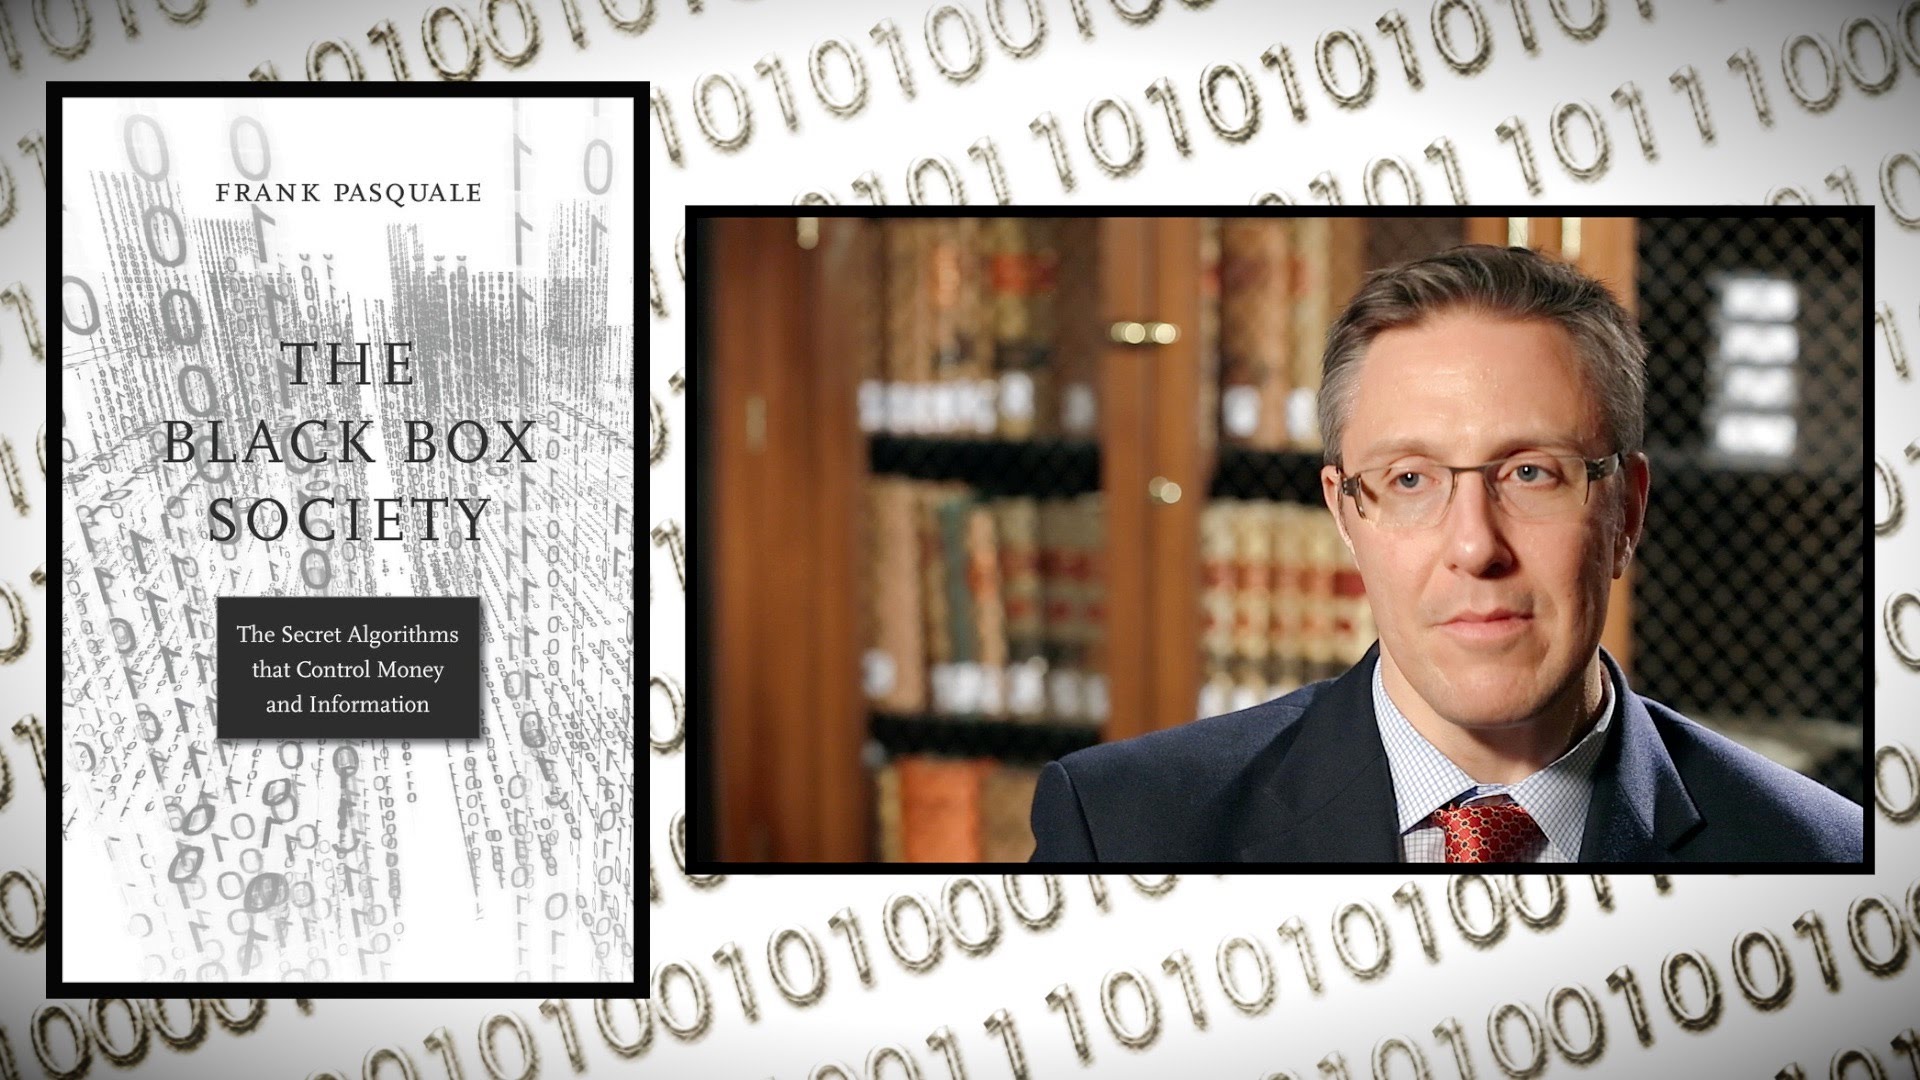 The Black Box Society: The Secret Algorithms That Control Money and Information by Frank Pasquale